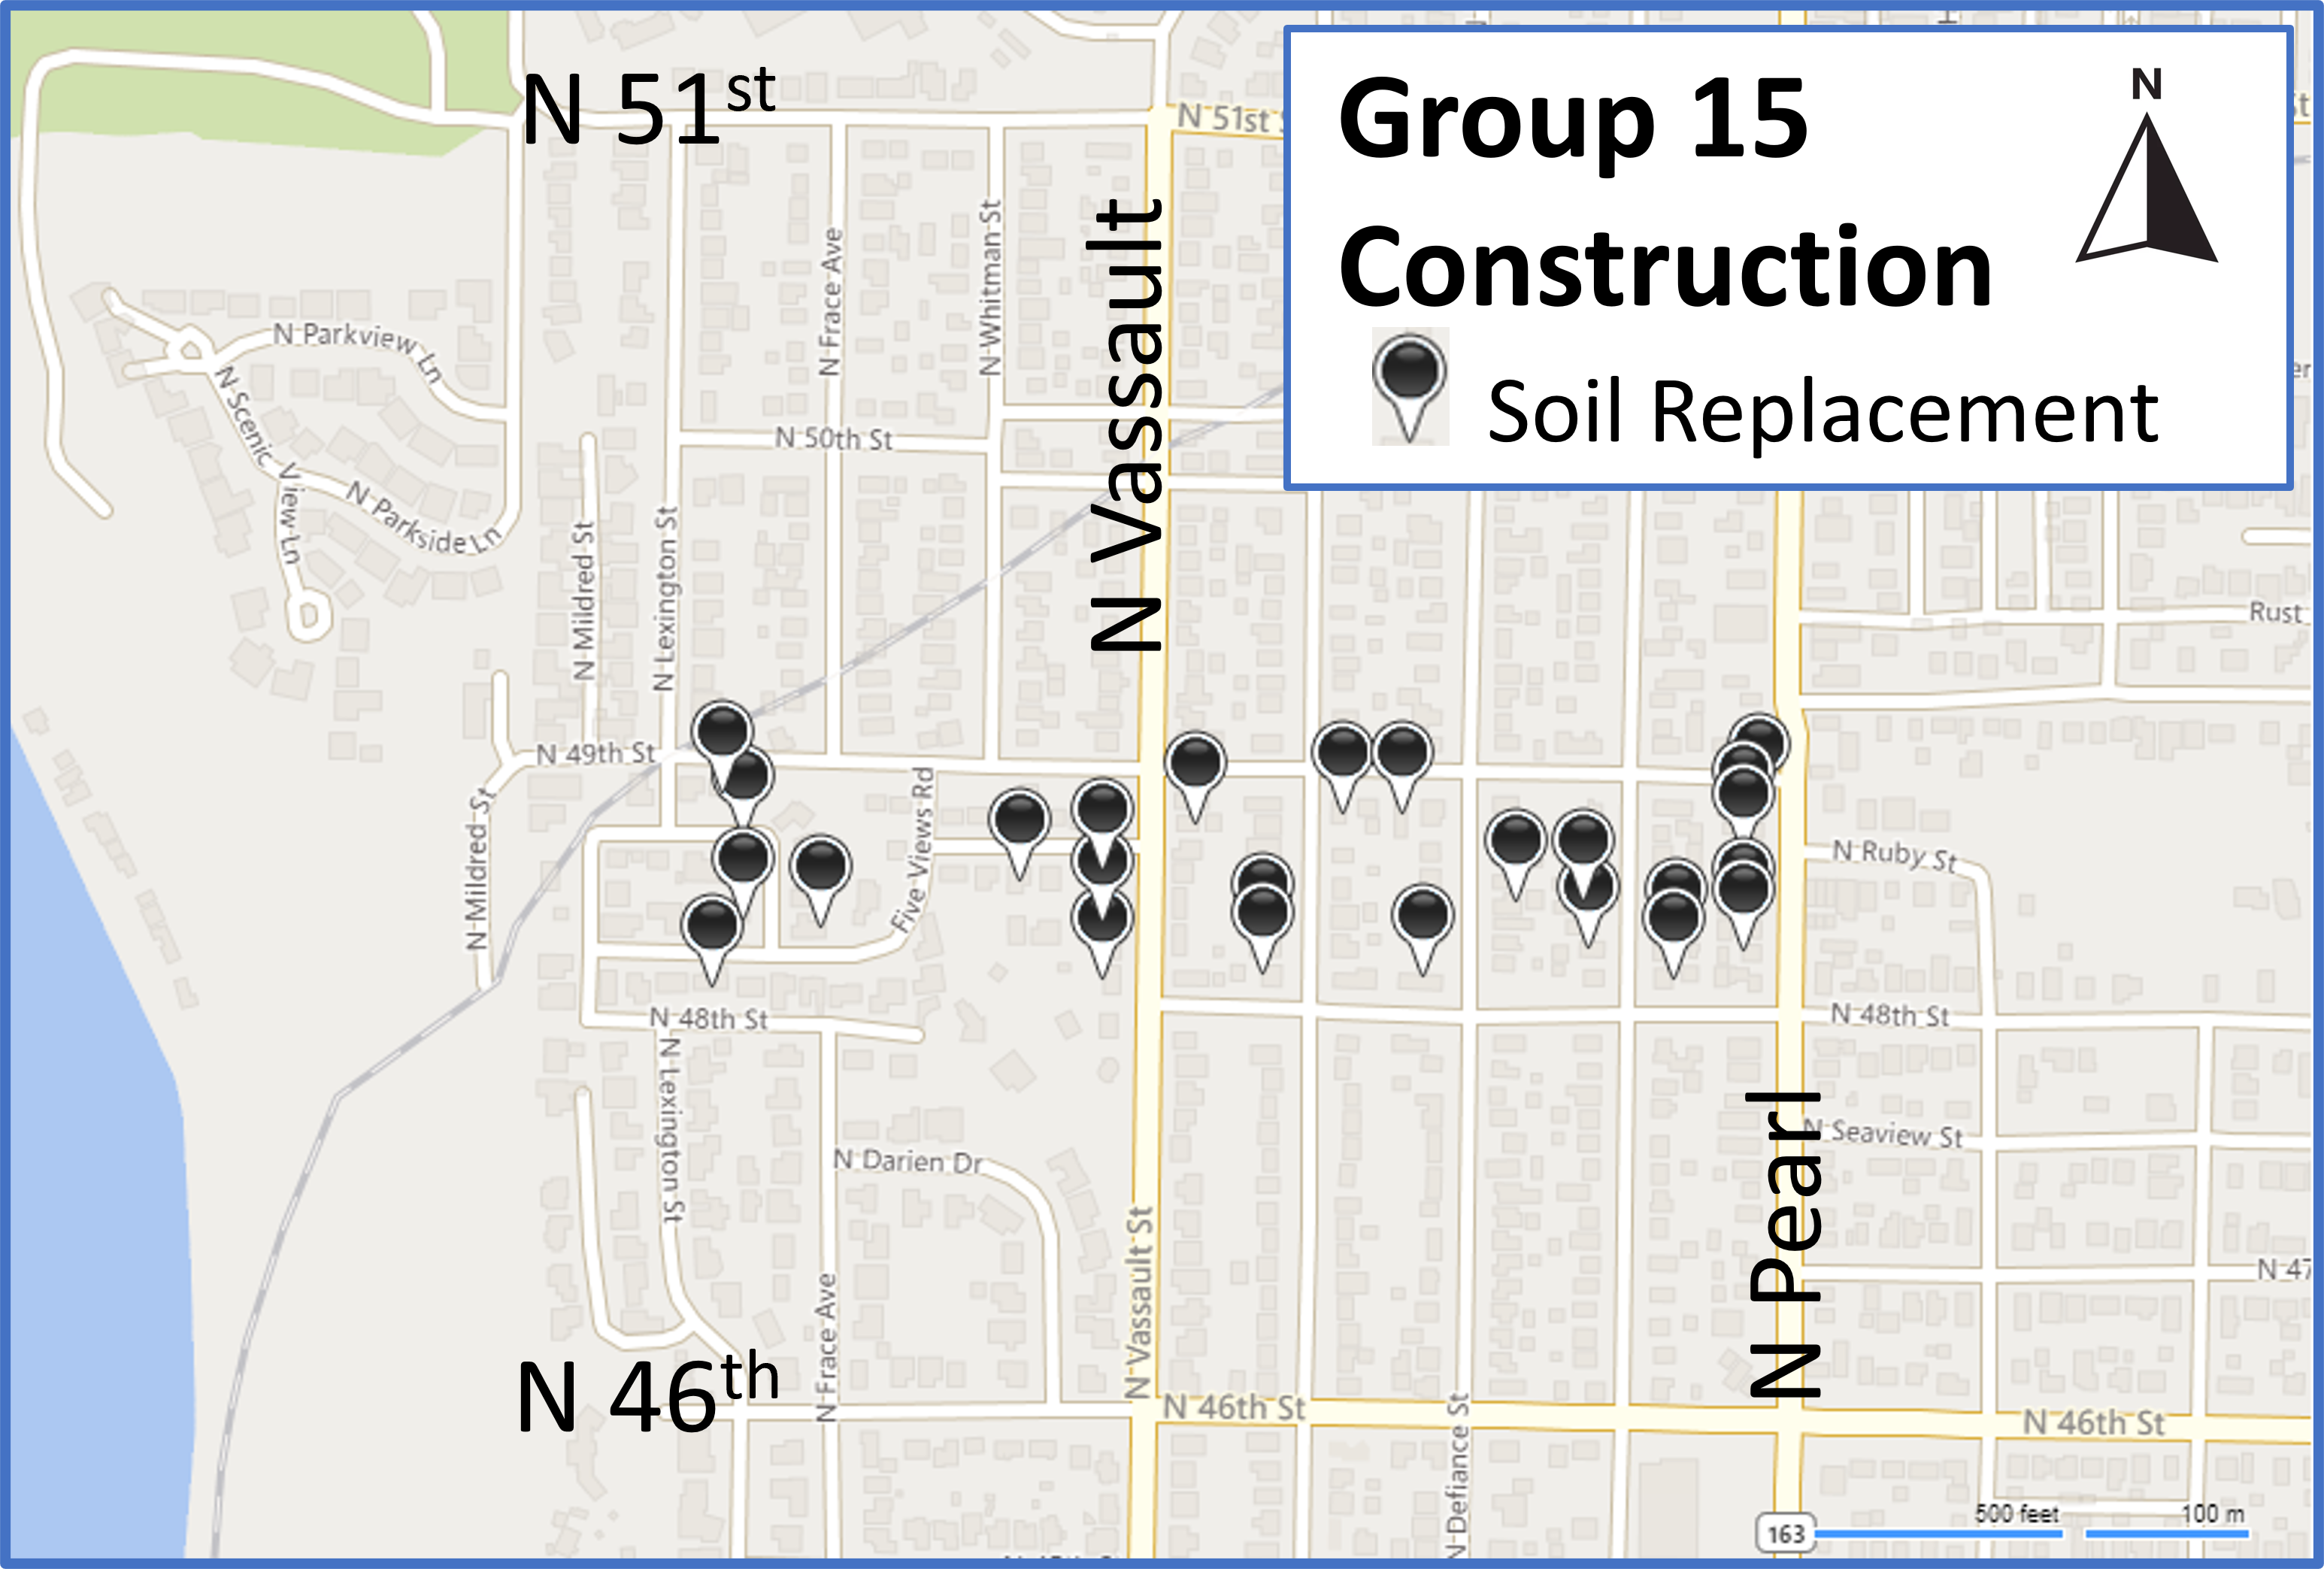 25 properties receiving soil replacement are west of Pearl St. between N 46th and N 51st